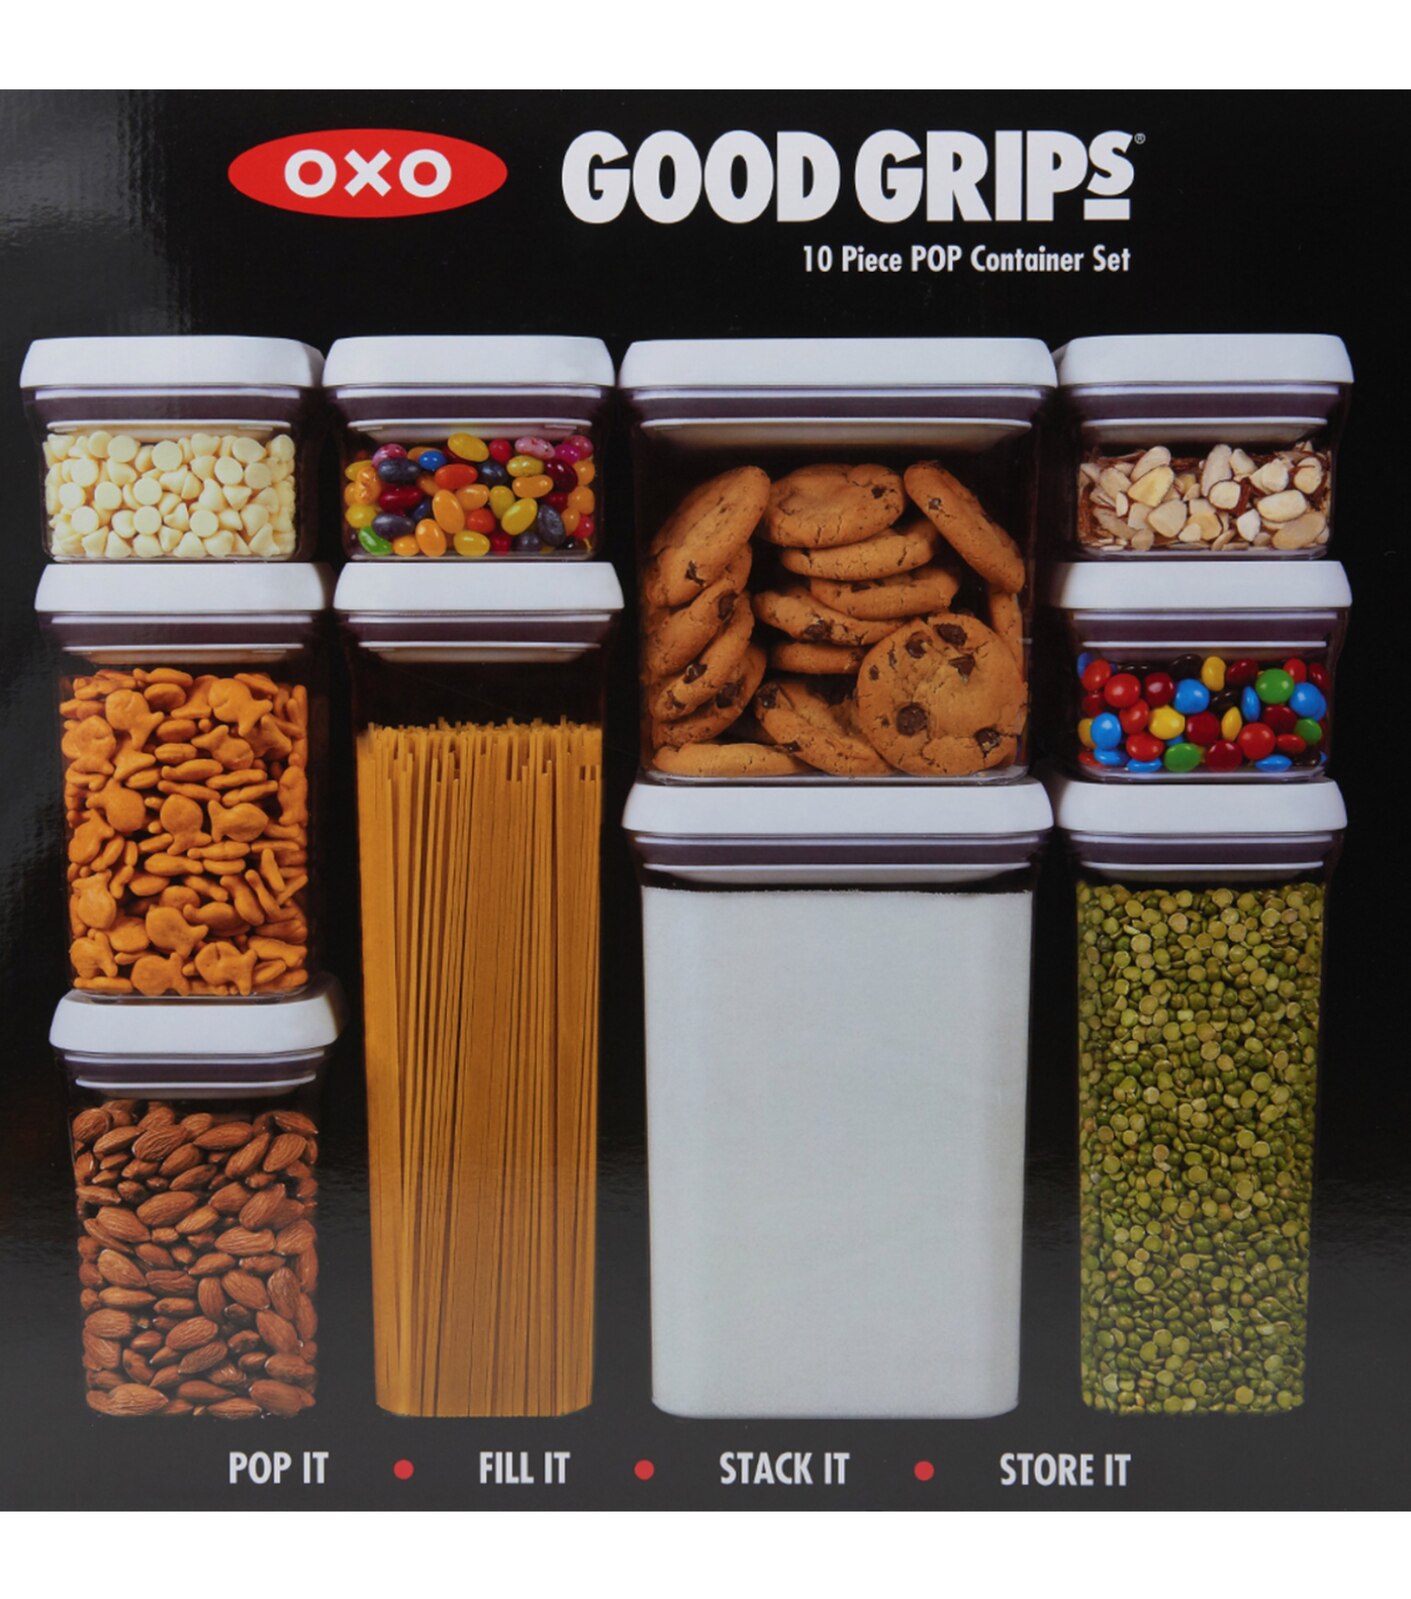 OXO Good Grips POP Container (Big Square, Short, 2.8qt) – The Baby